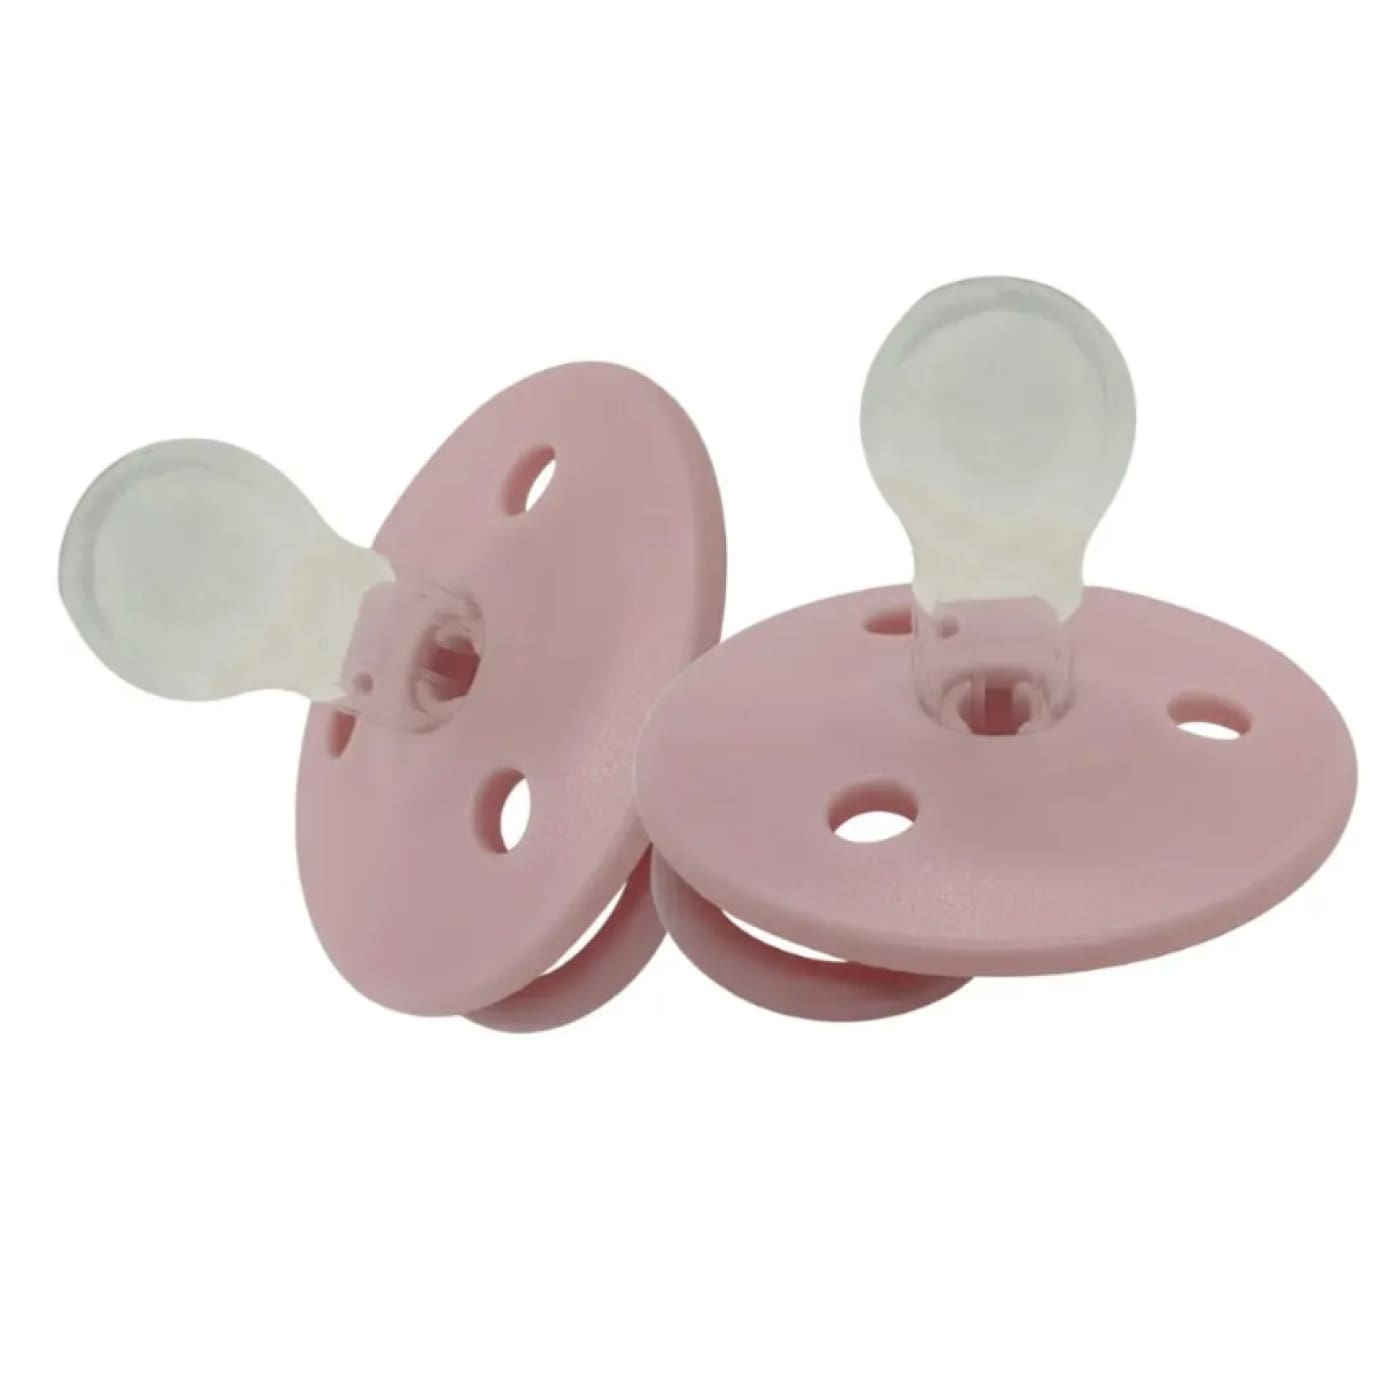 Mininor Silicone Pacifier/Dummy - Rose - NURSING & FEEDING - DUMMIES/SOOTHERS